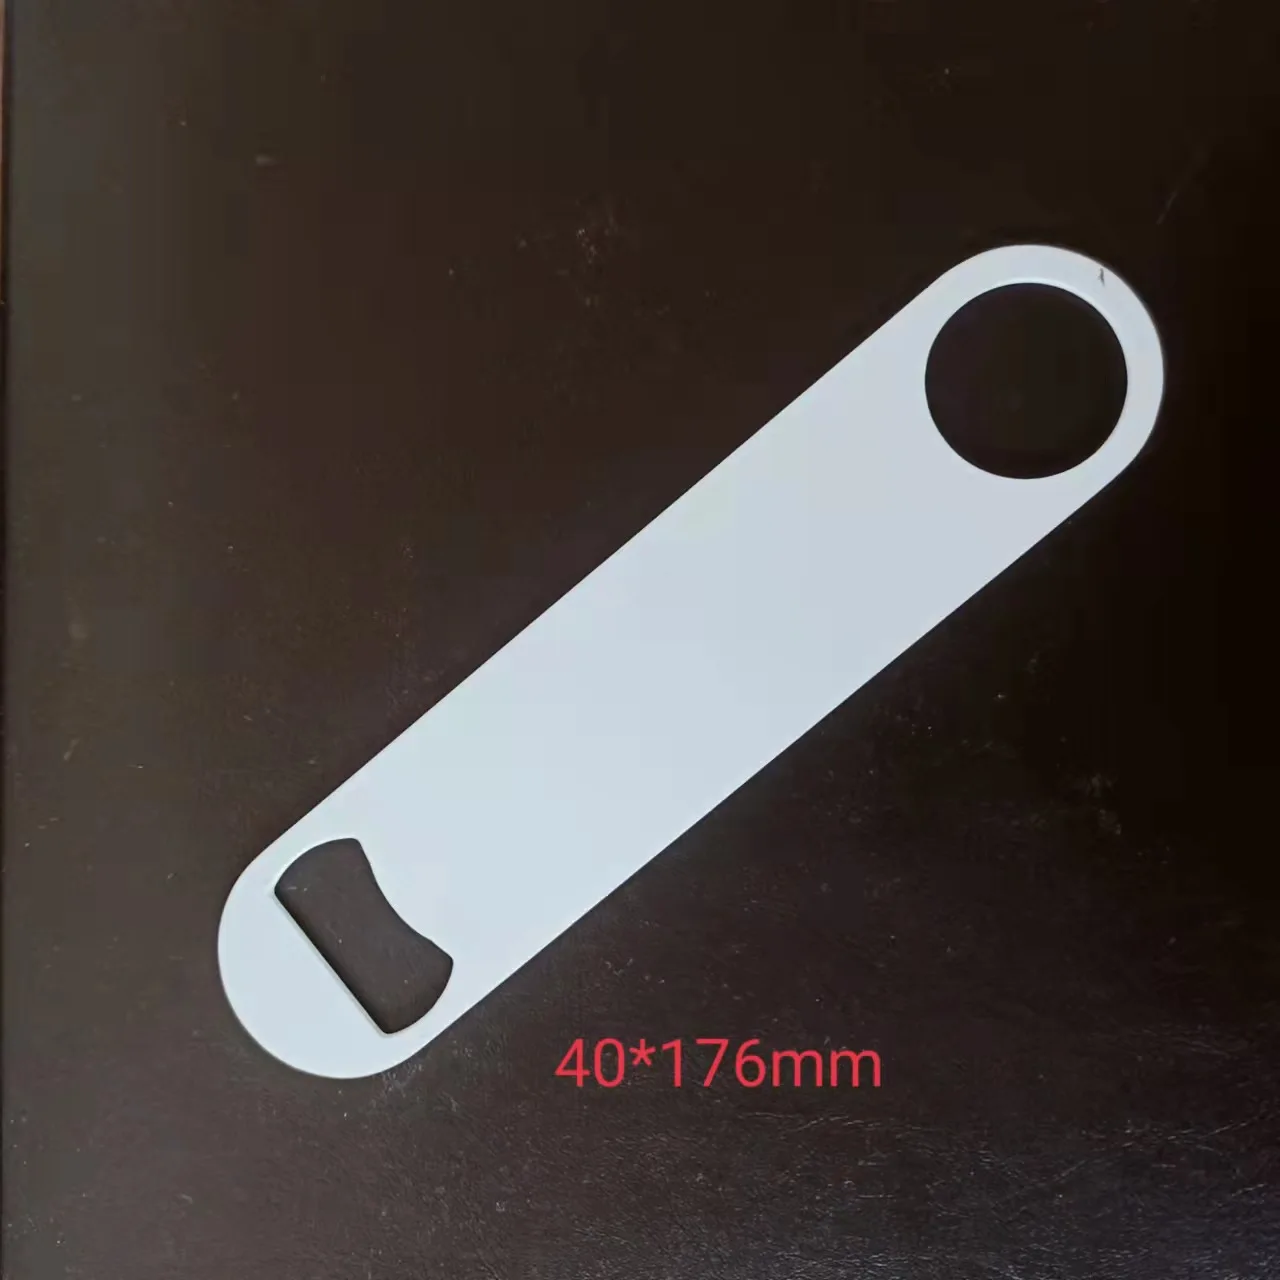 Factory Price!!! 100pcs/lot Bottle Beer Opener Cap Lifter Sublimation Blank White Dye INK Printing Heat Transfer High Quality factory price 50pcs lot new blank beer bottle opener for laser engraving cutting